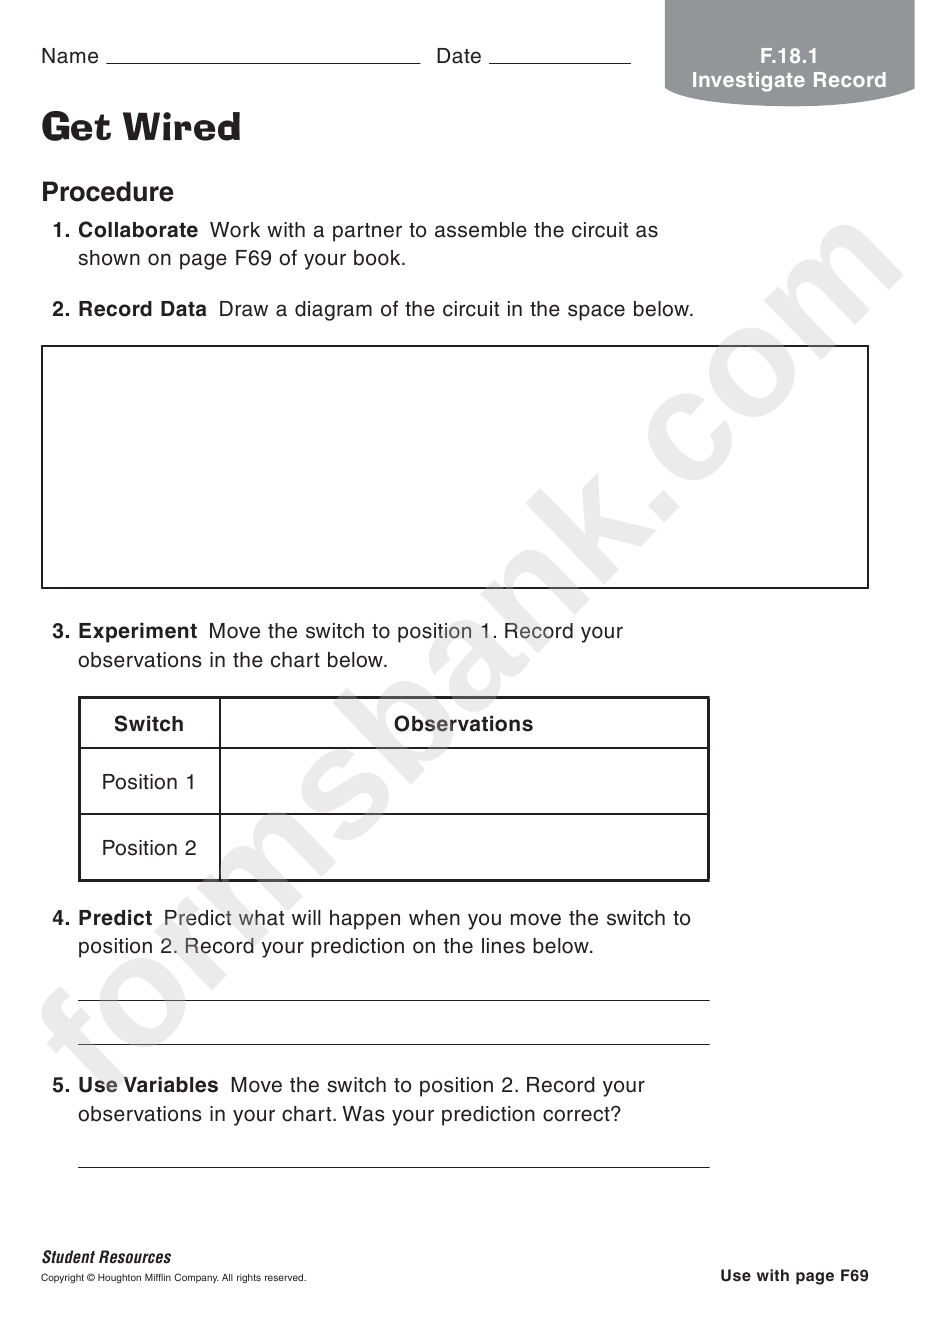 Get Wired Physics Worksheet